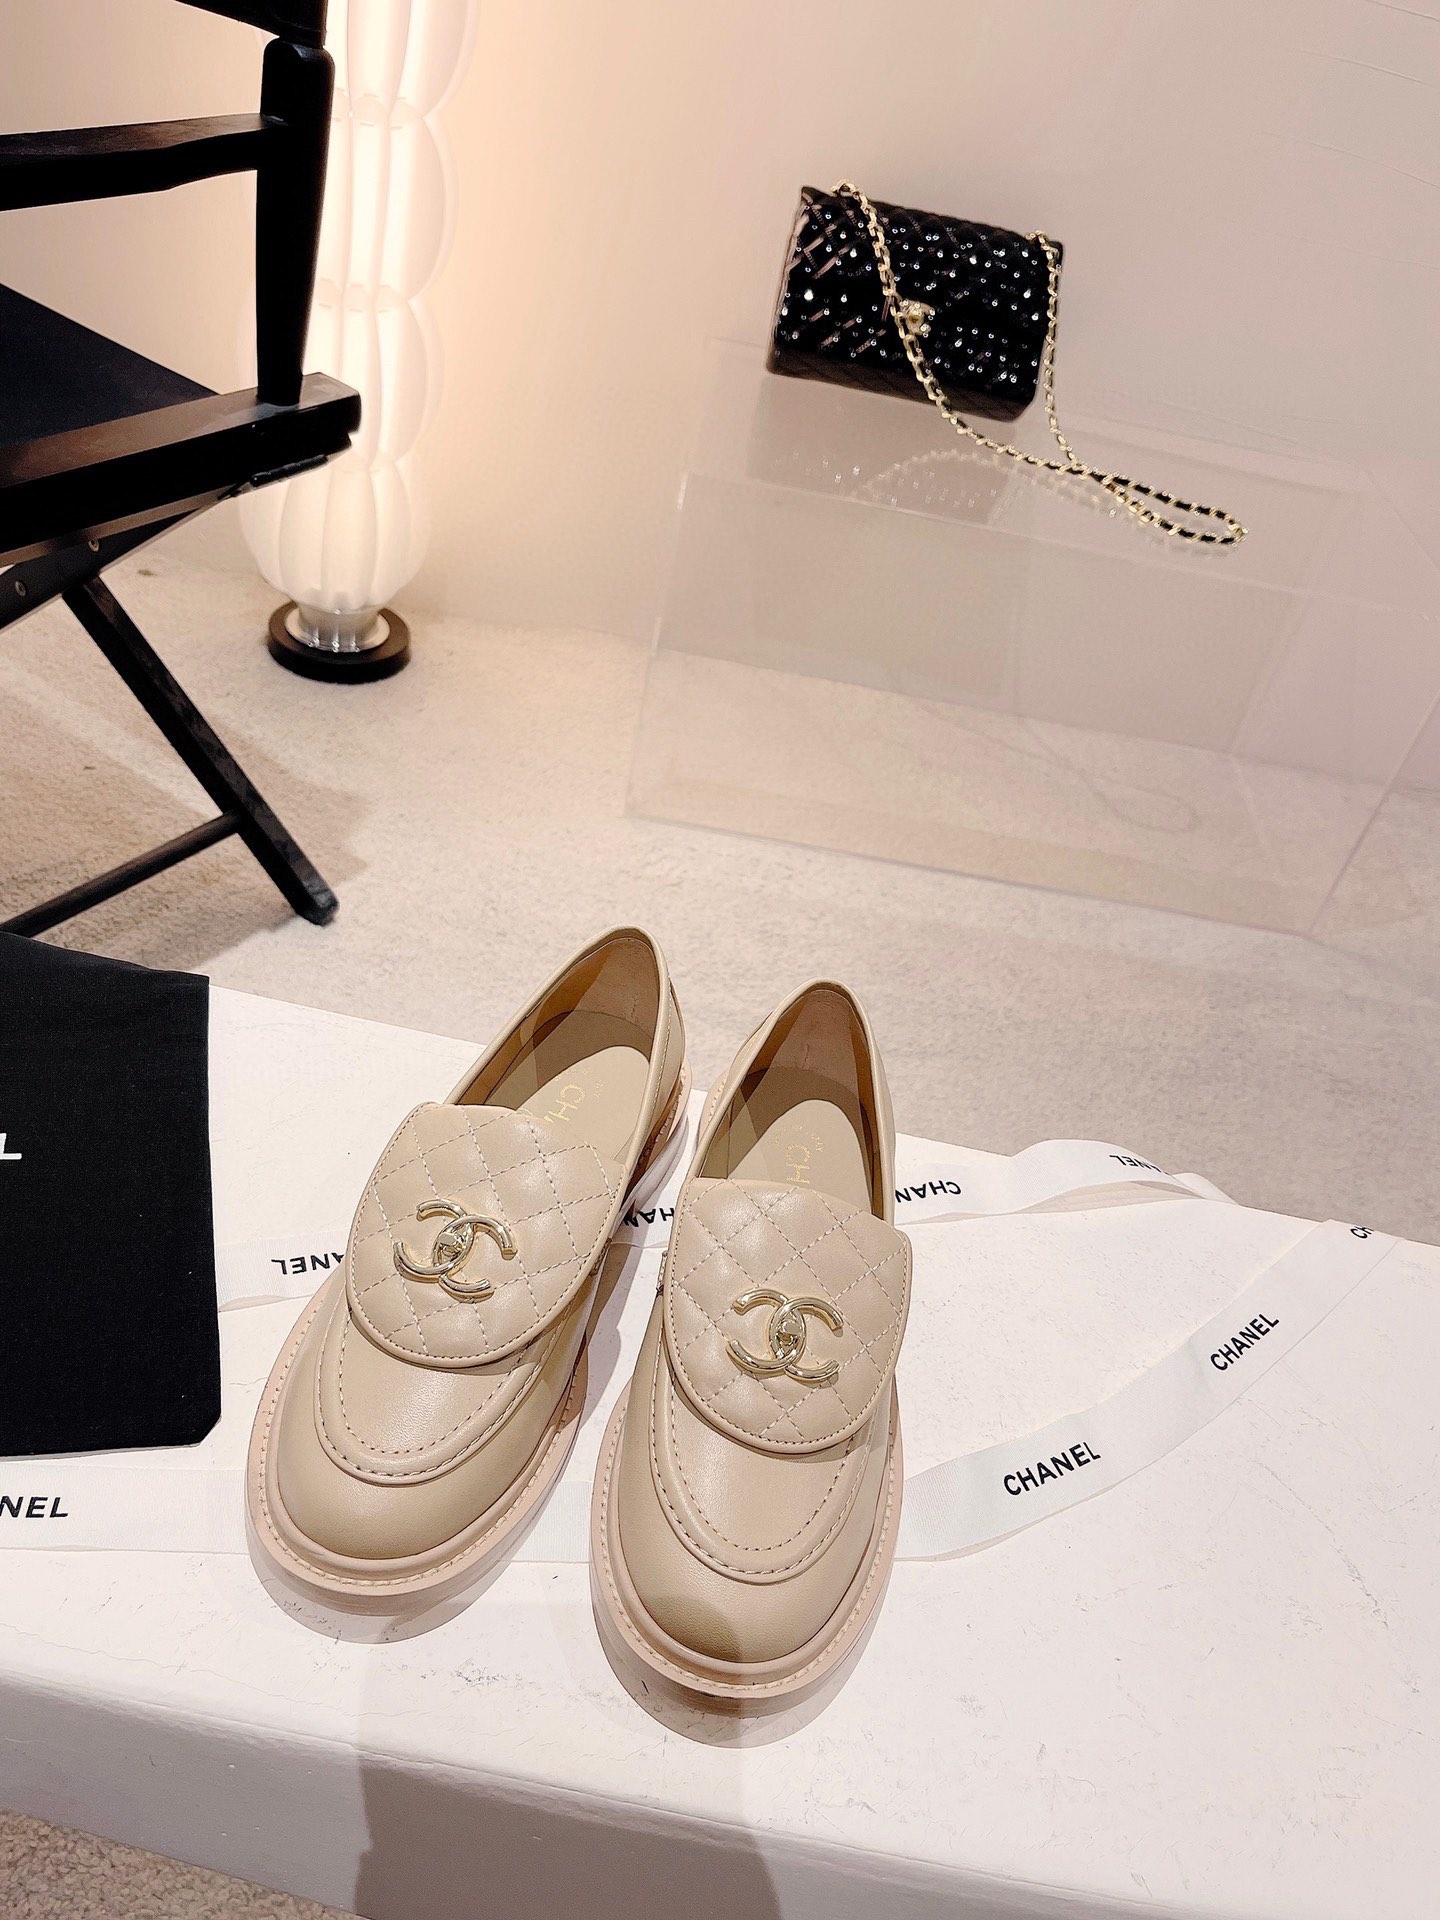 Chanel Shoes Loafers Corduroy Genuine Leather Sheepskin Fall Collection